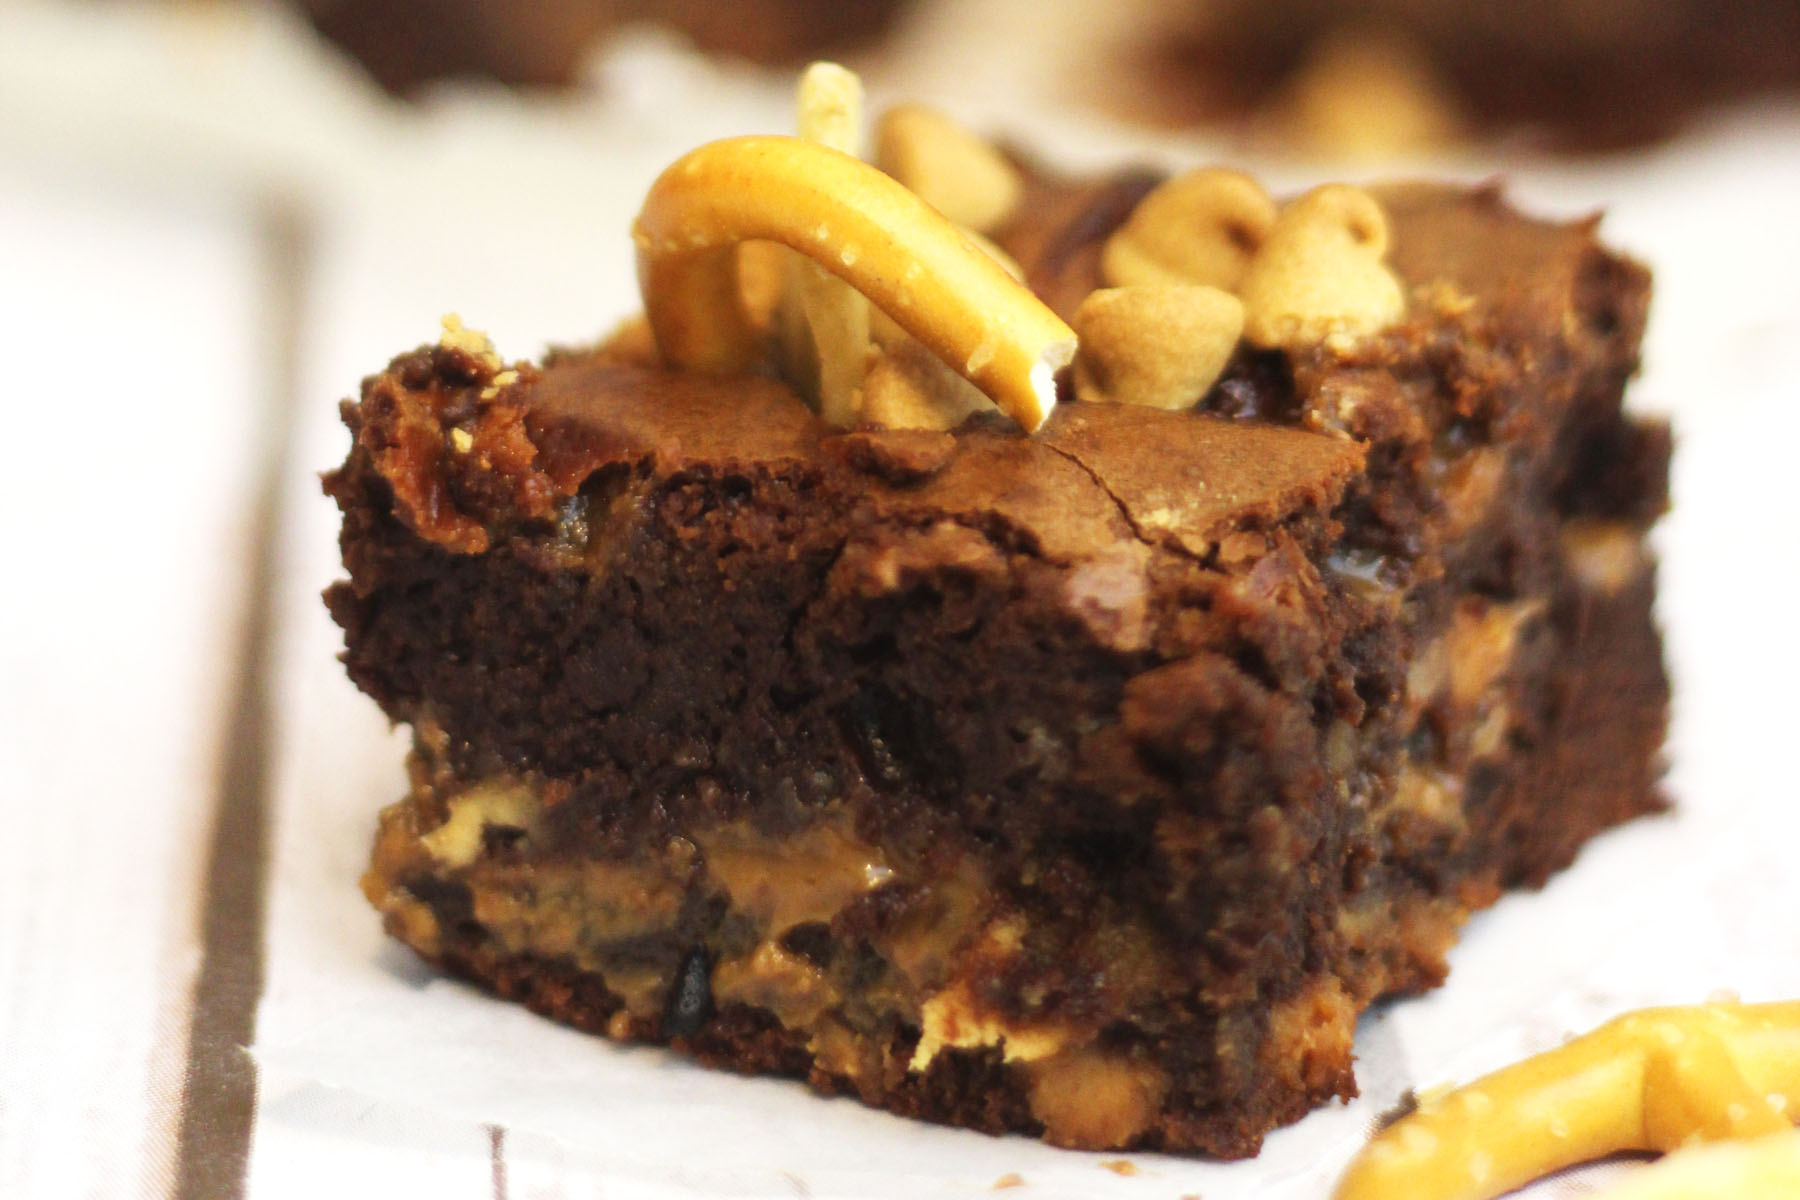 Fat Elvis Brownies stuffed with banana, pretzels and peanut butter